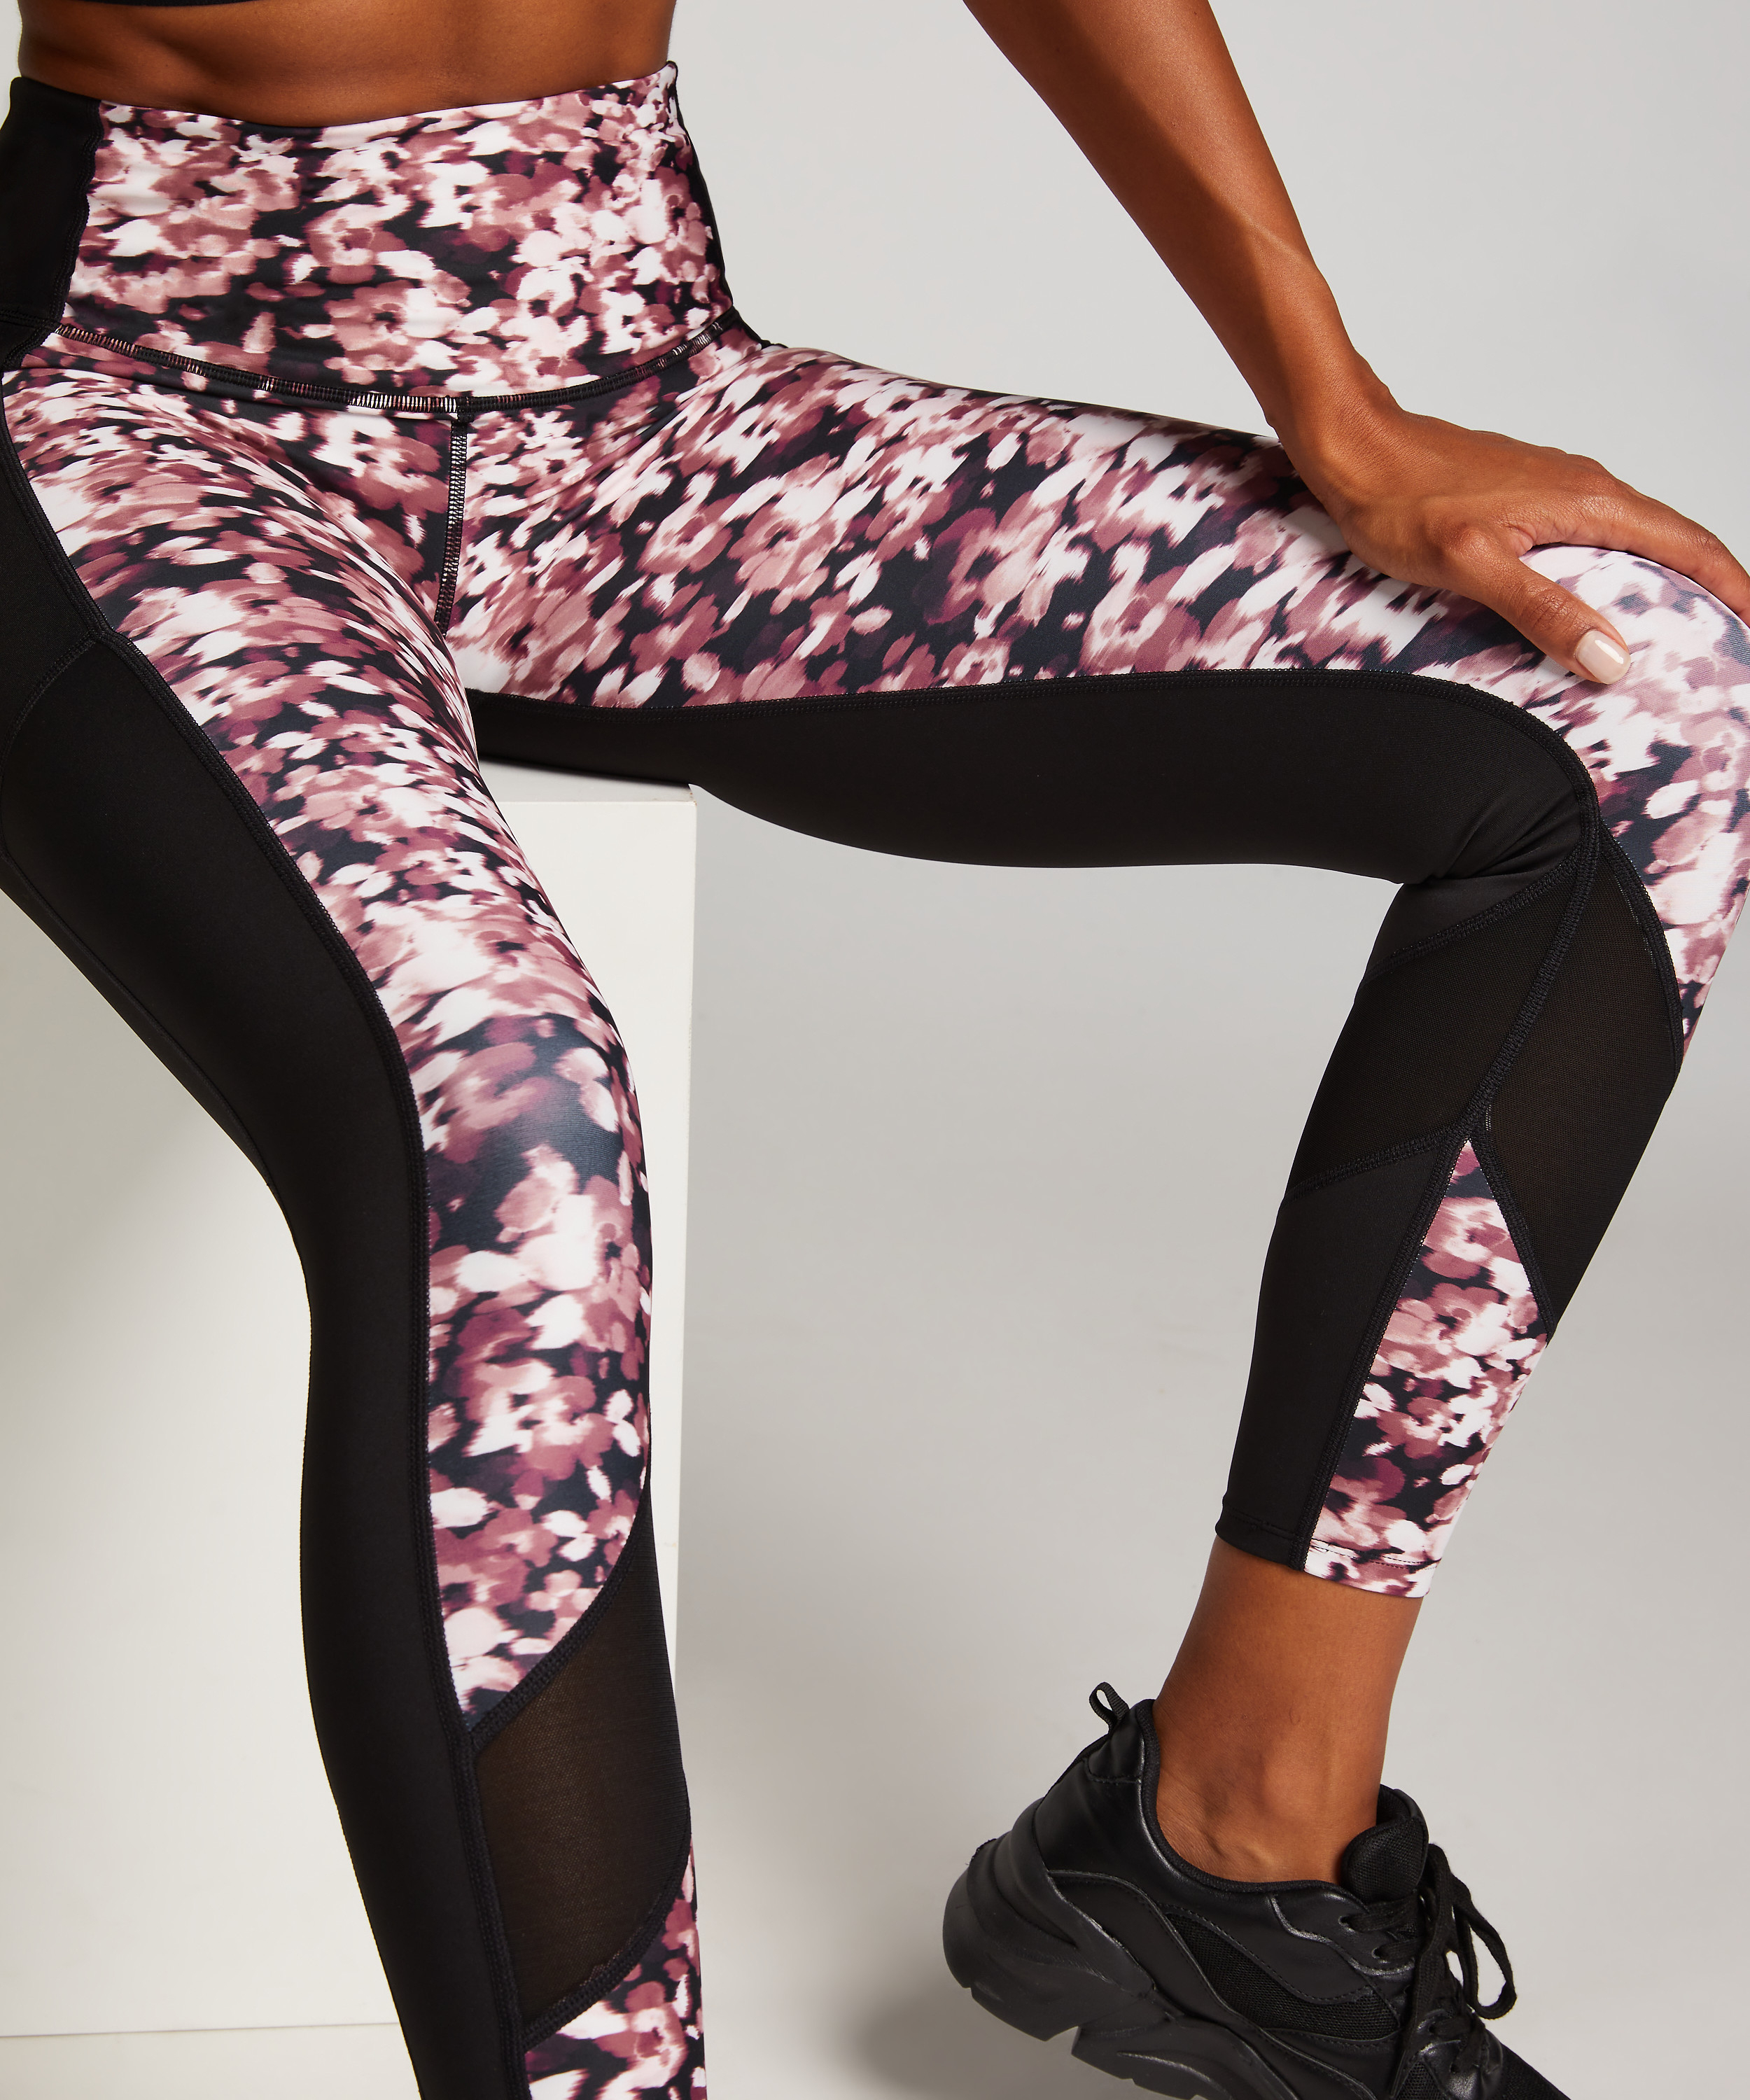 HKMX Oh My Squat High Waisted Leggings, Pink, main